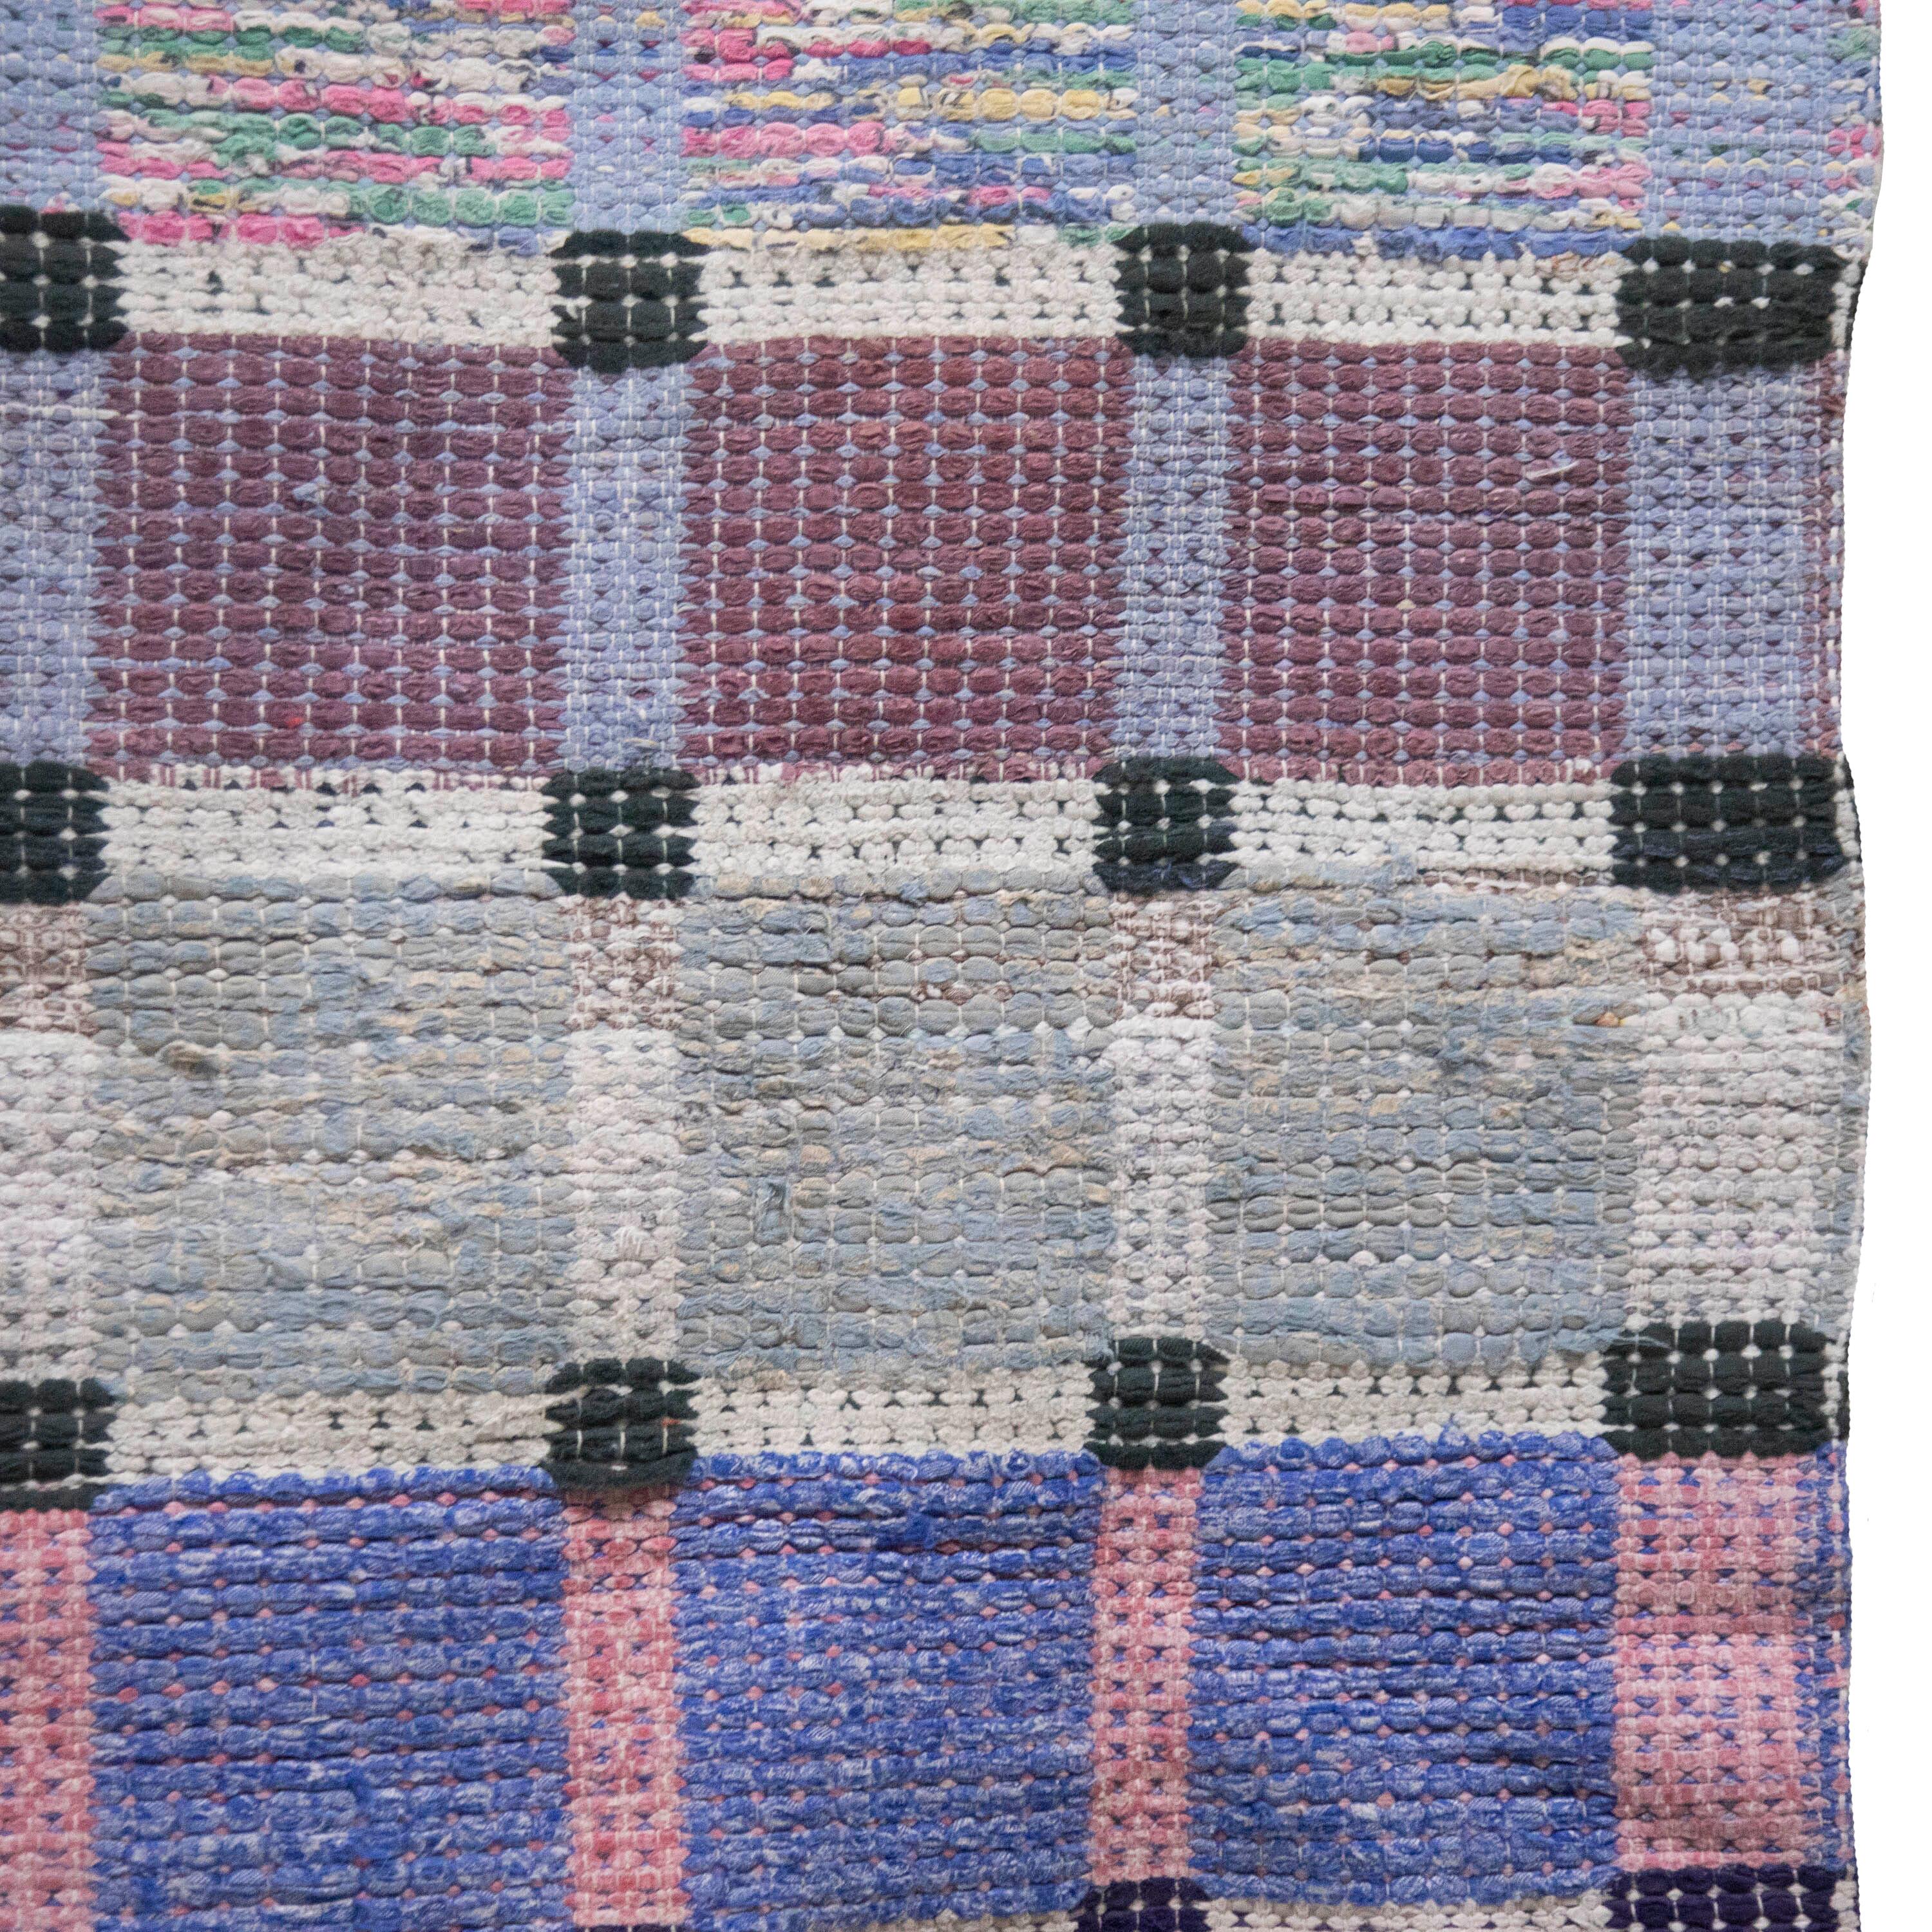 20th Century Swedish rag rug.   Featuring a block print design in tones of pink, blue, and ecru.   This rug is machine washable at 30 degrees.
RT6024590